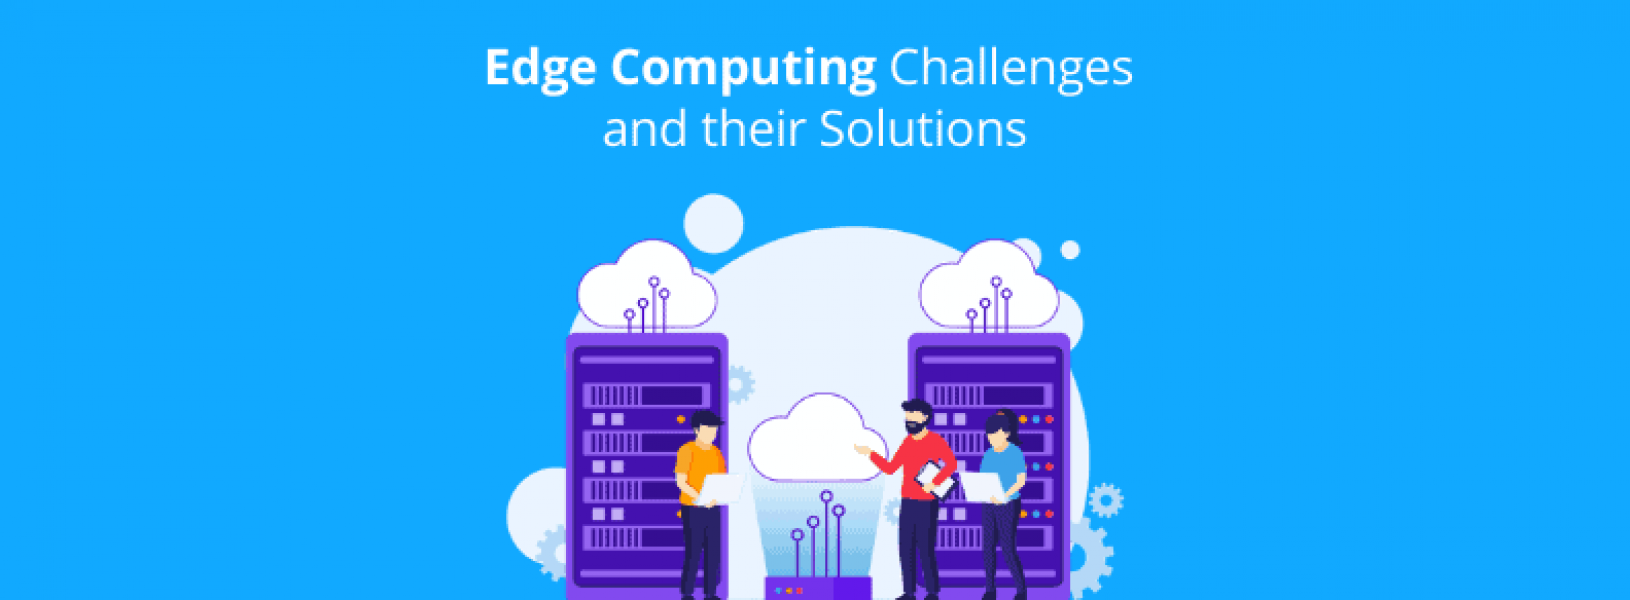 Edge Computing Challenges and their Solutions - GreyB